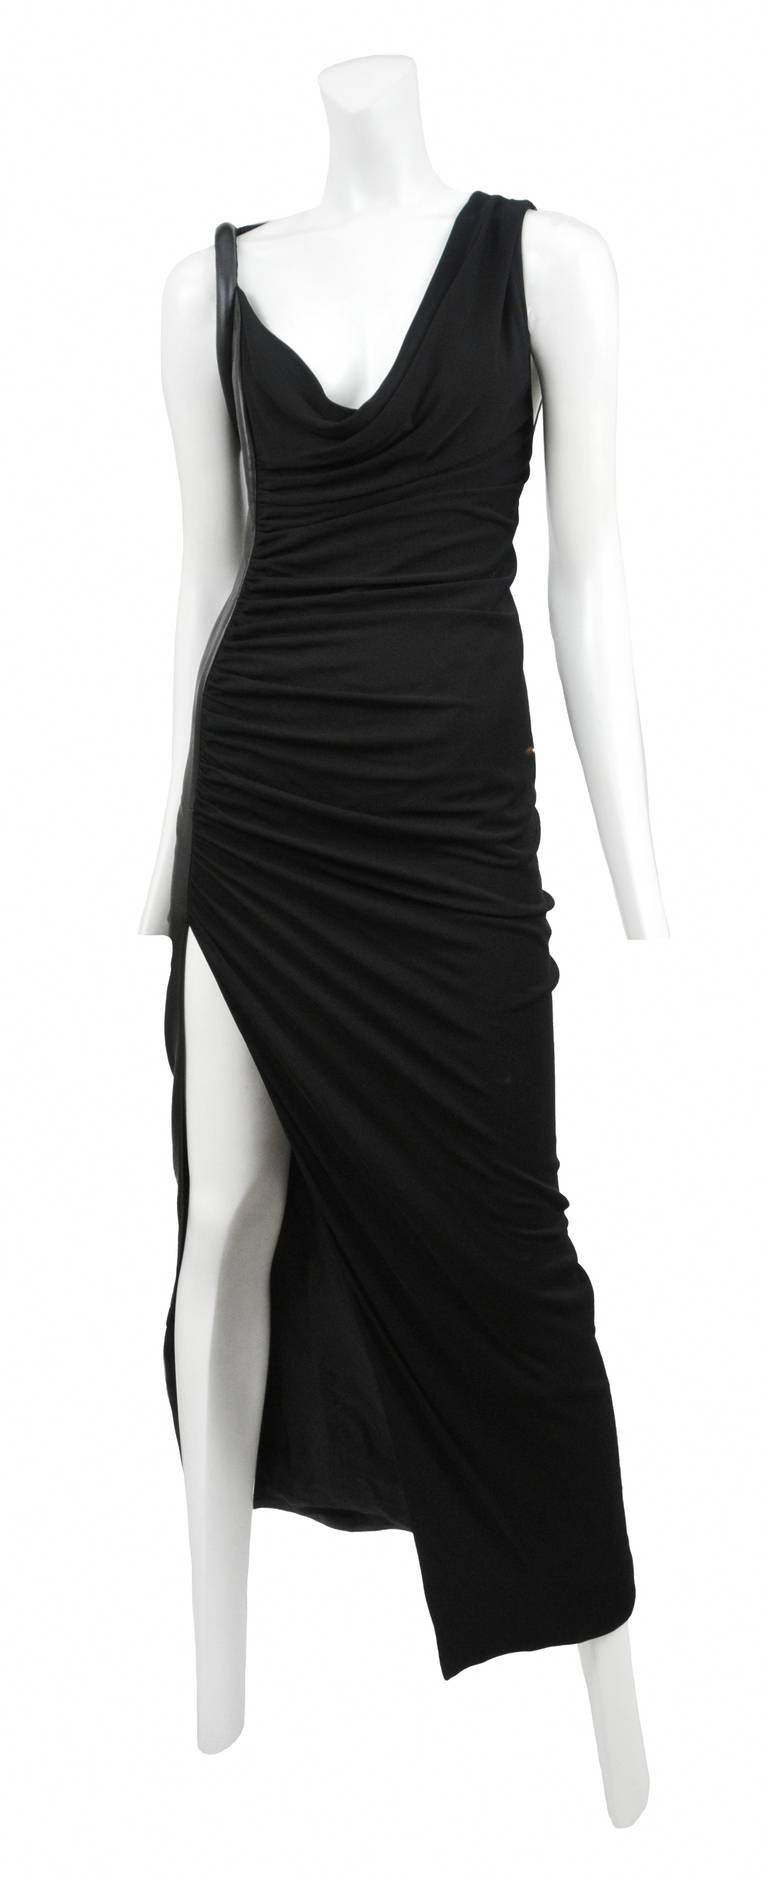 Black ruched jersey dress with full leather back detail and twist detail.